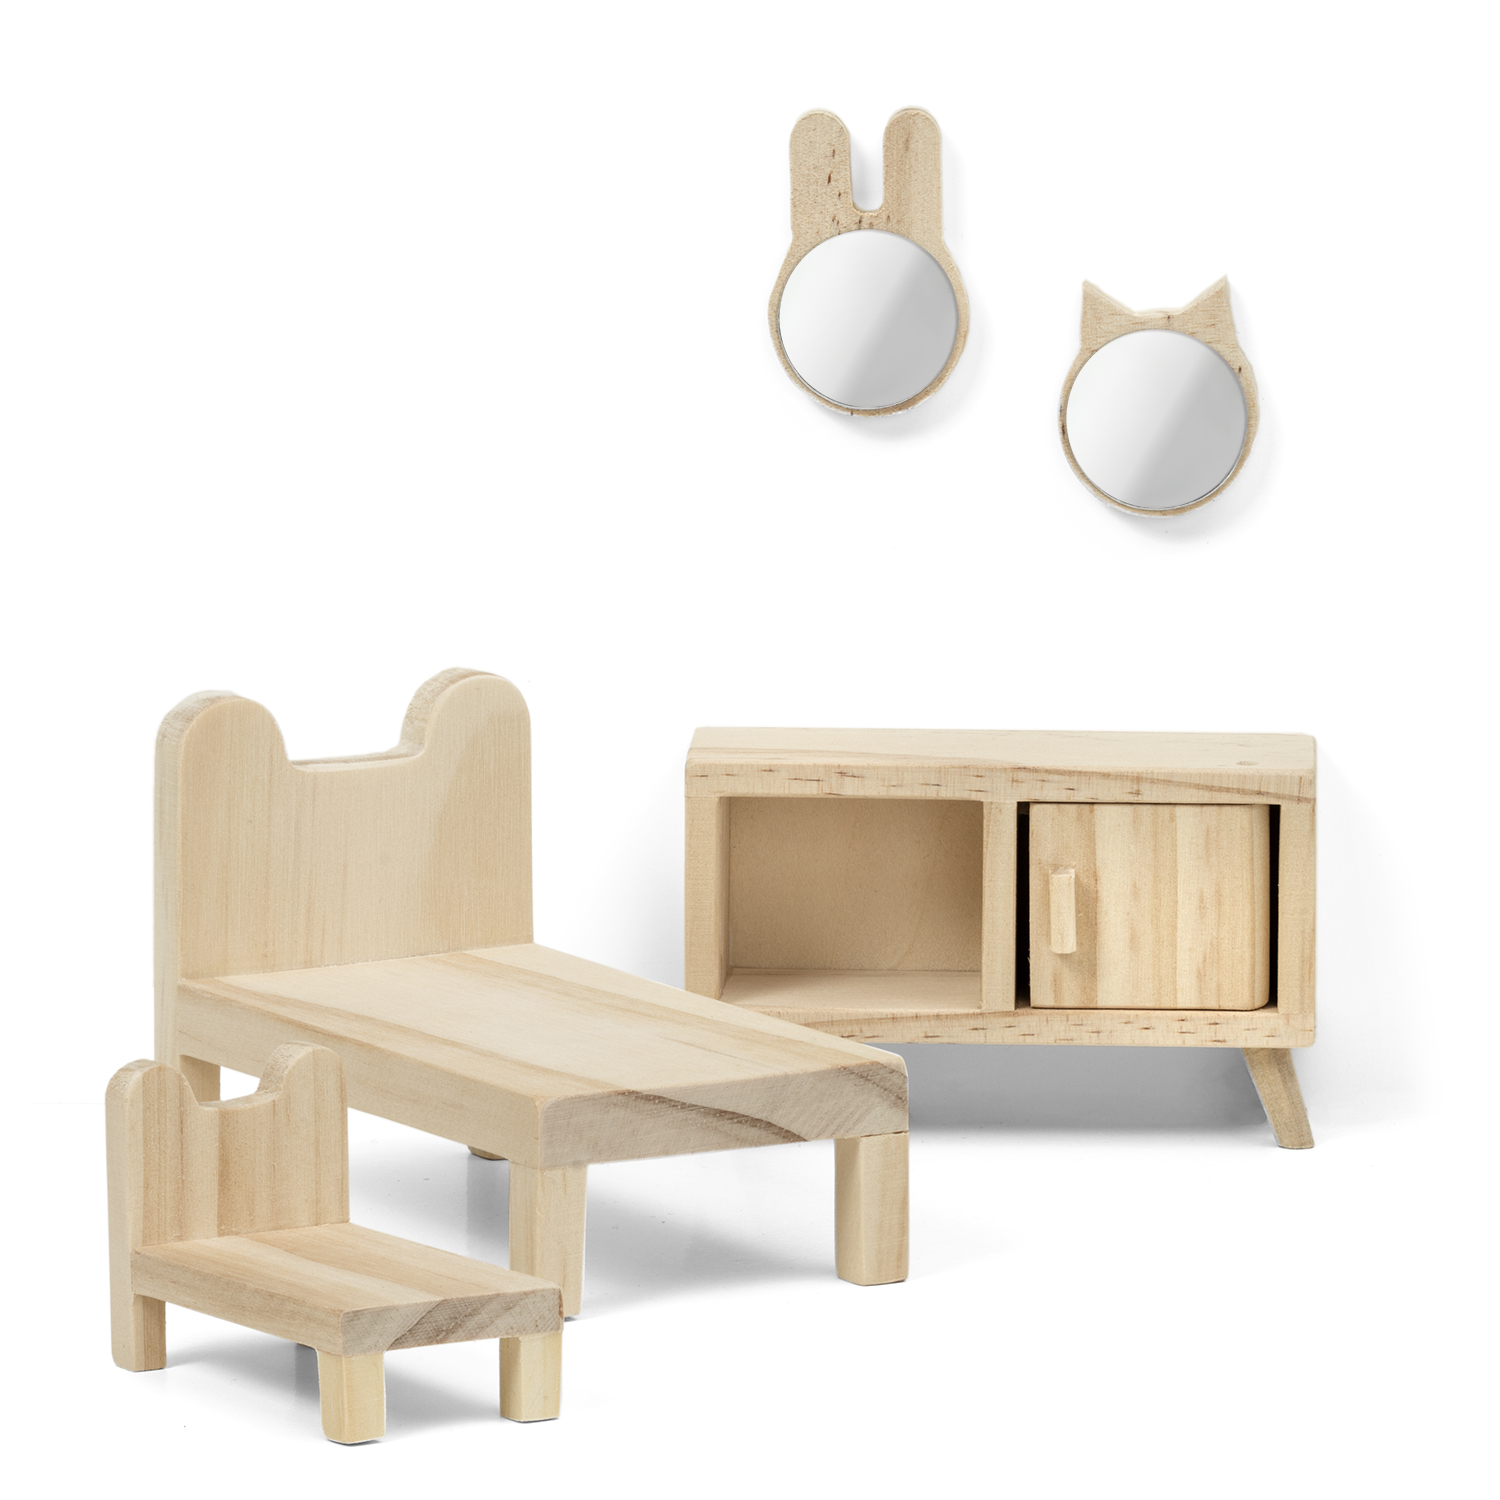 Doll house furniture & doll house accessories lundby dollhouse furniture bedroom set natural wood